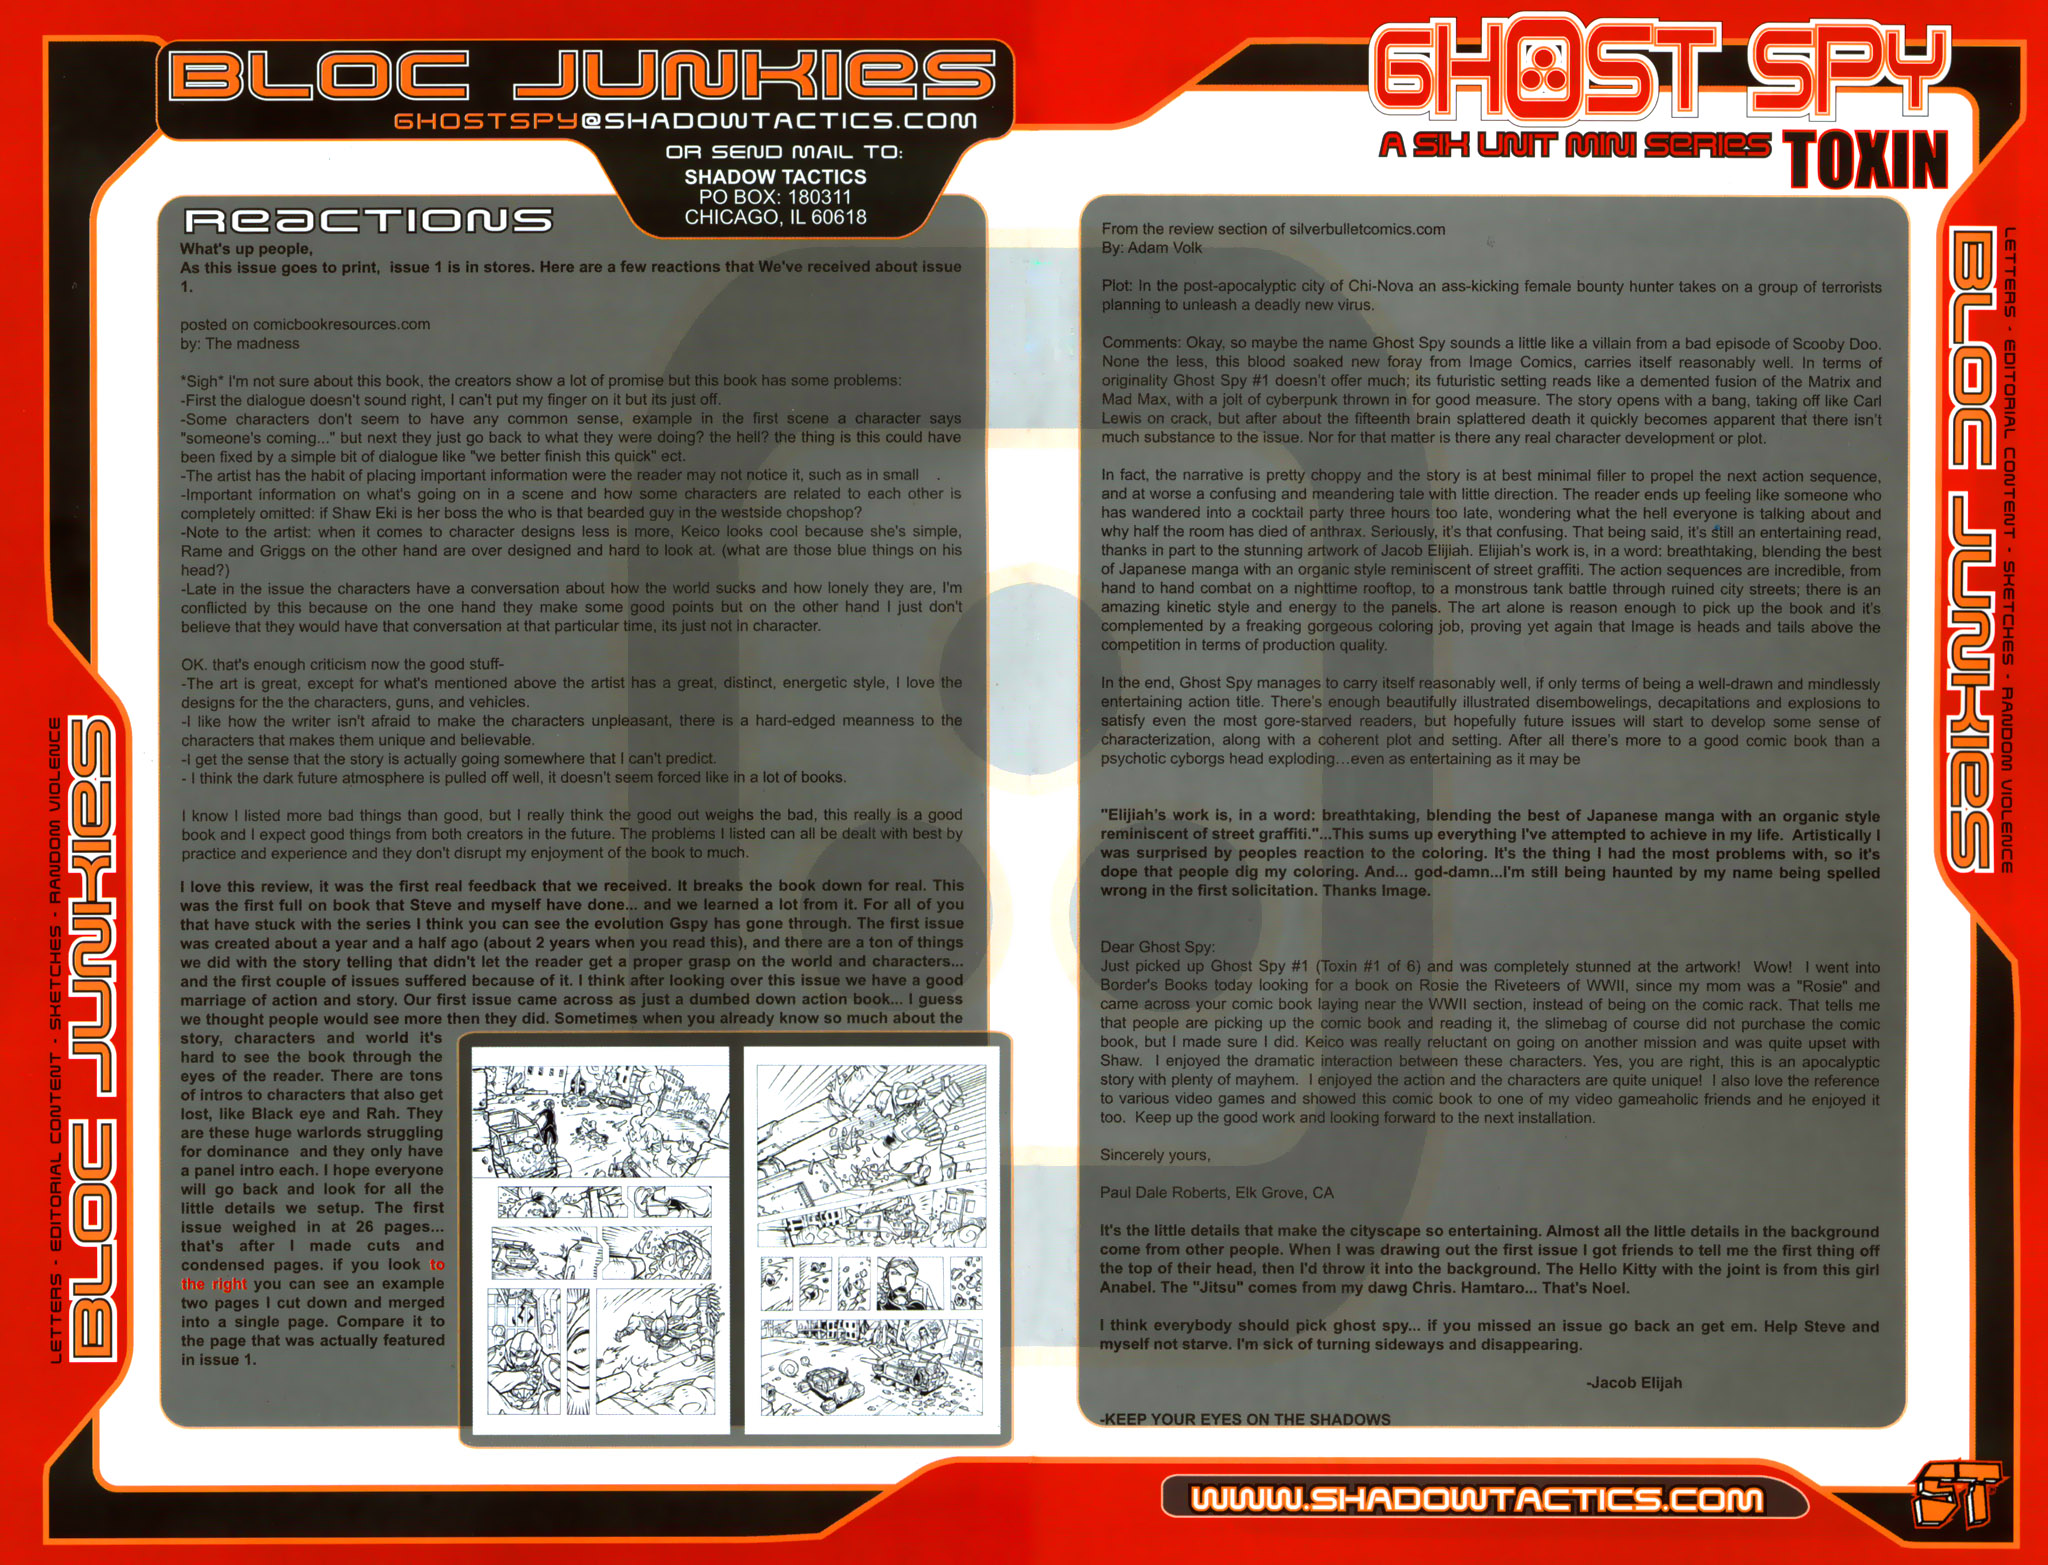 Read online Ghost Spy comic -  Issue #4 - 23